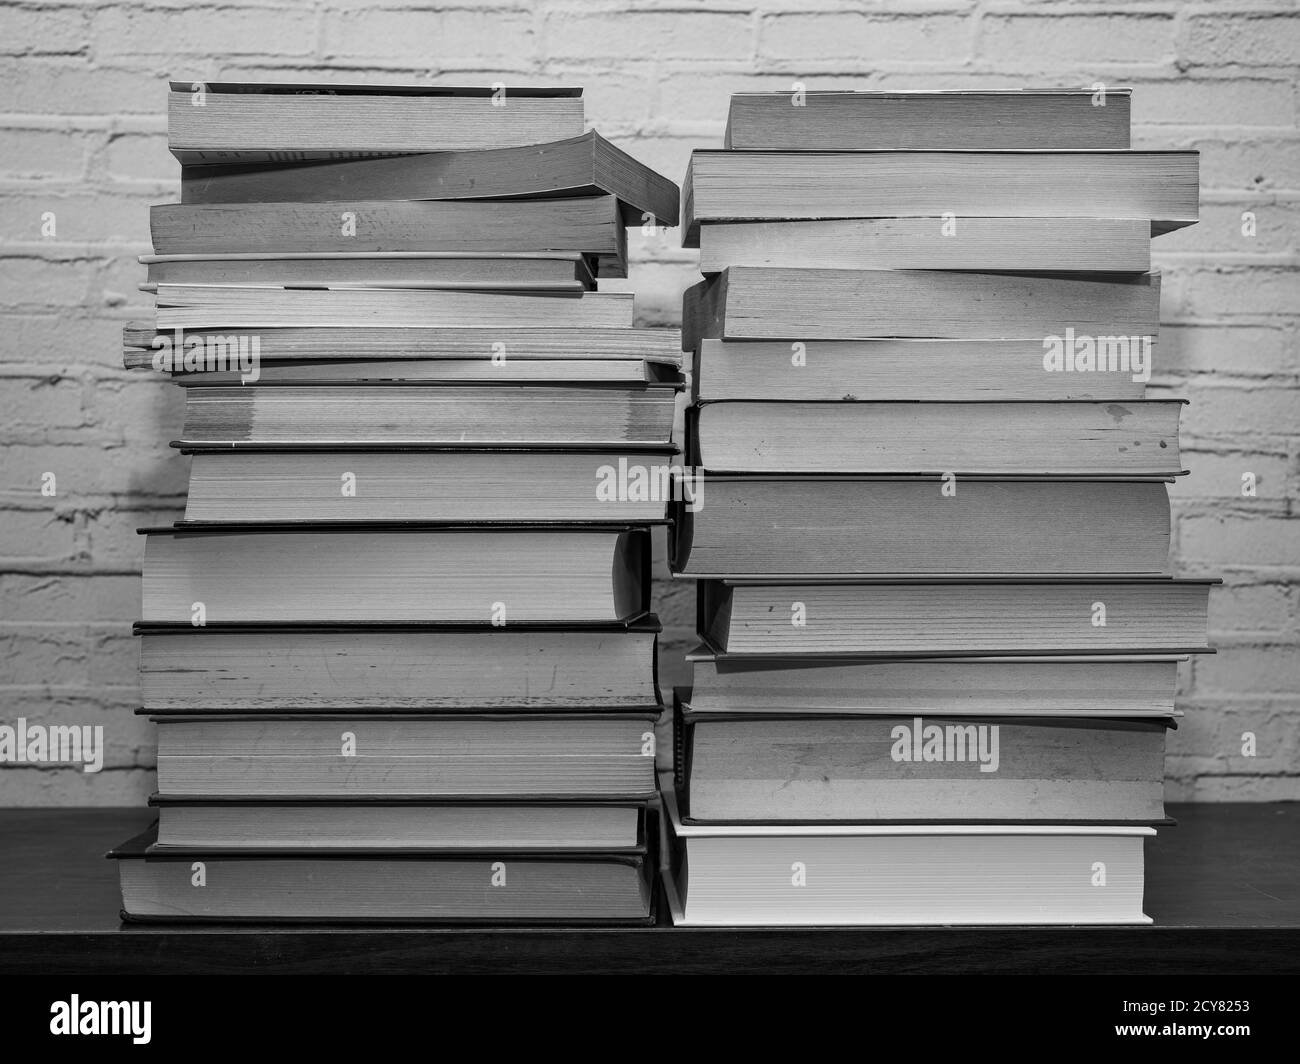 Black and white image of some books stacked on a shelf, light brick background Stock Photo